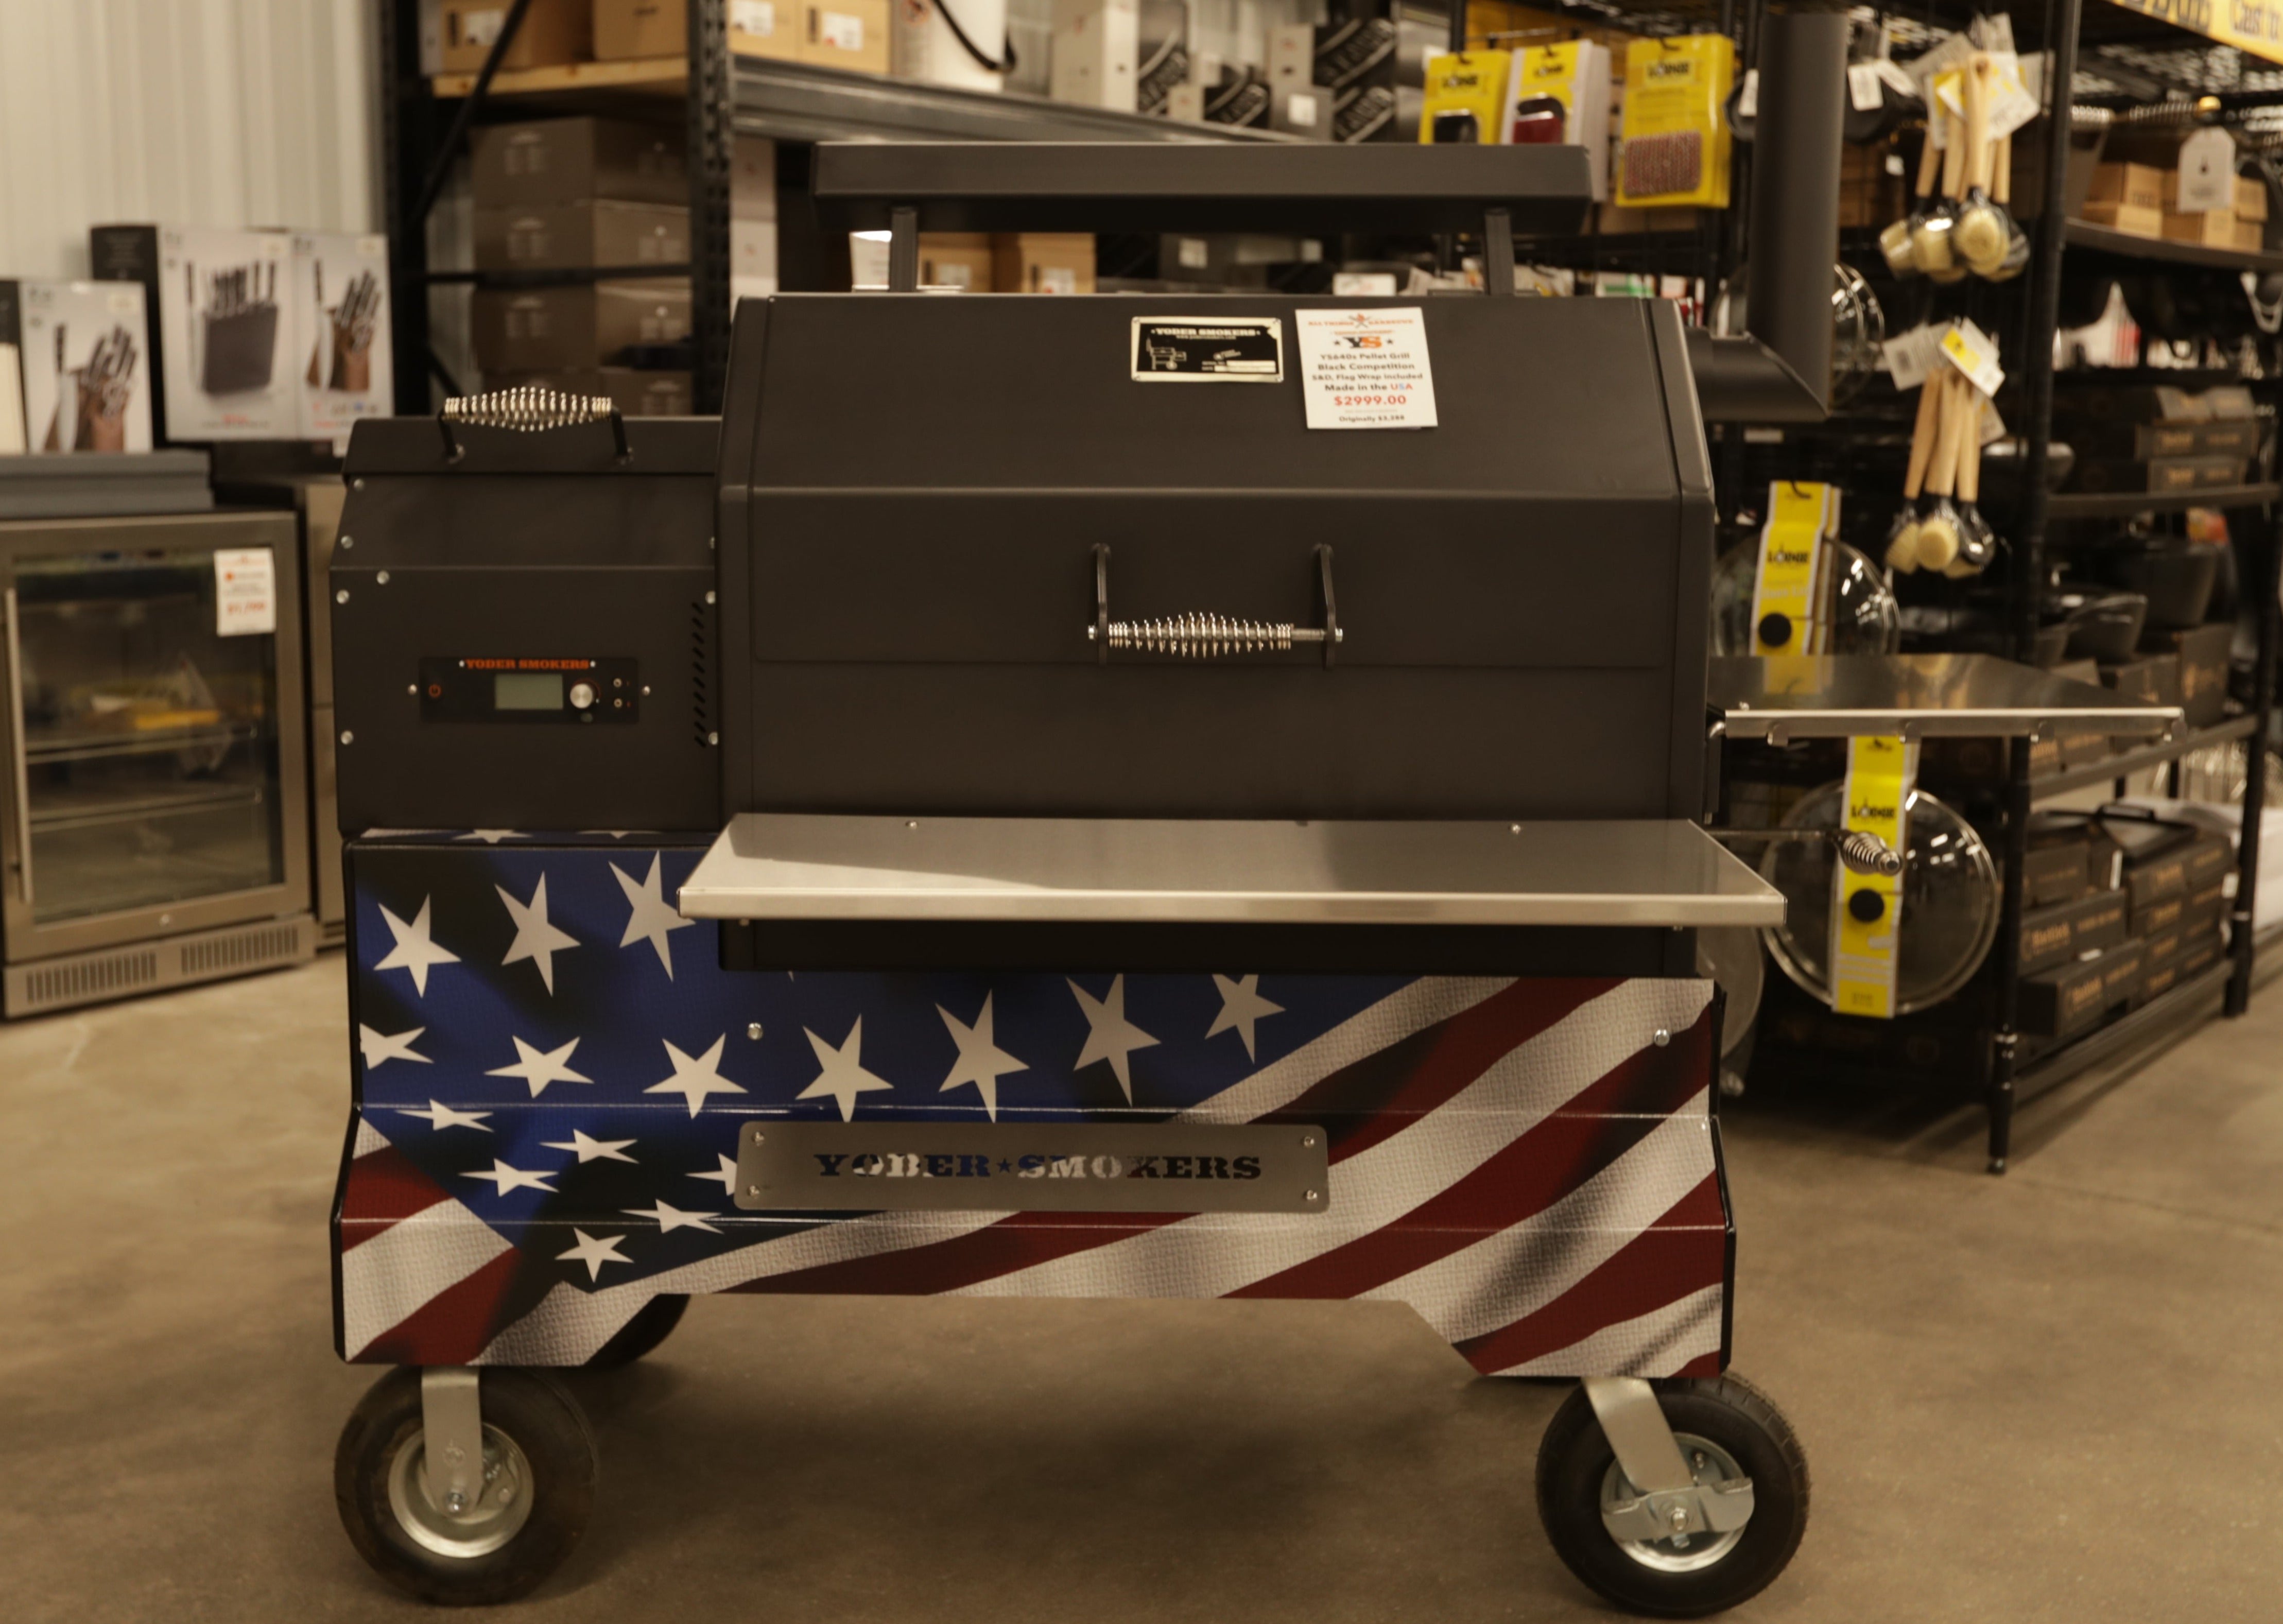 Copy of Local Special, Scratch & Dent, Yoder Smokers YS640s Pellet Grill on Competition Cart, Black Outdoor Grills Black